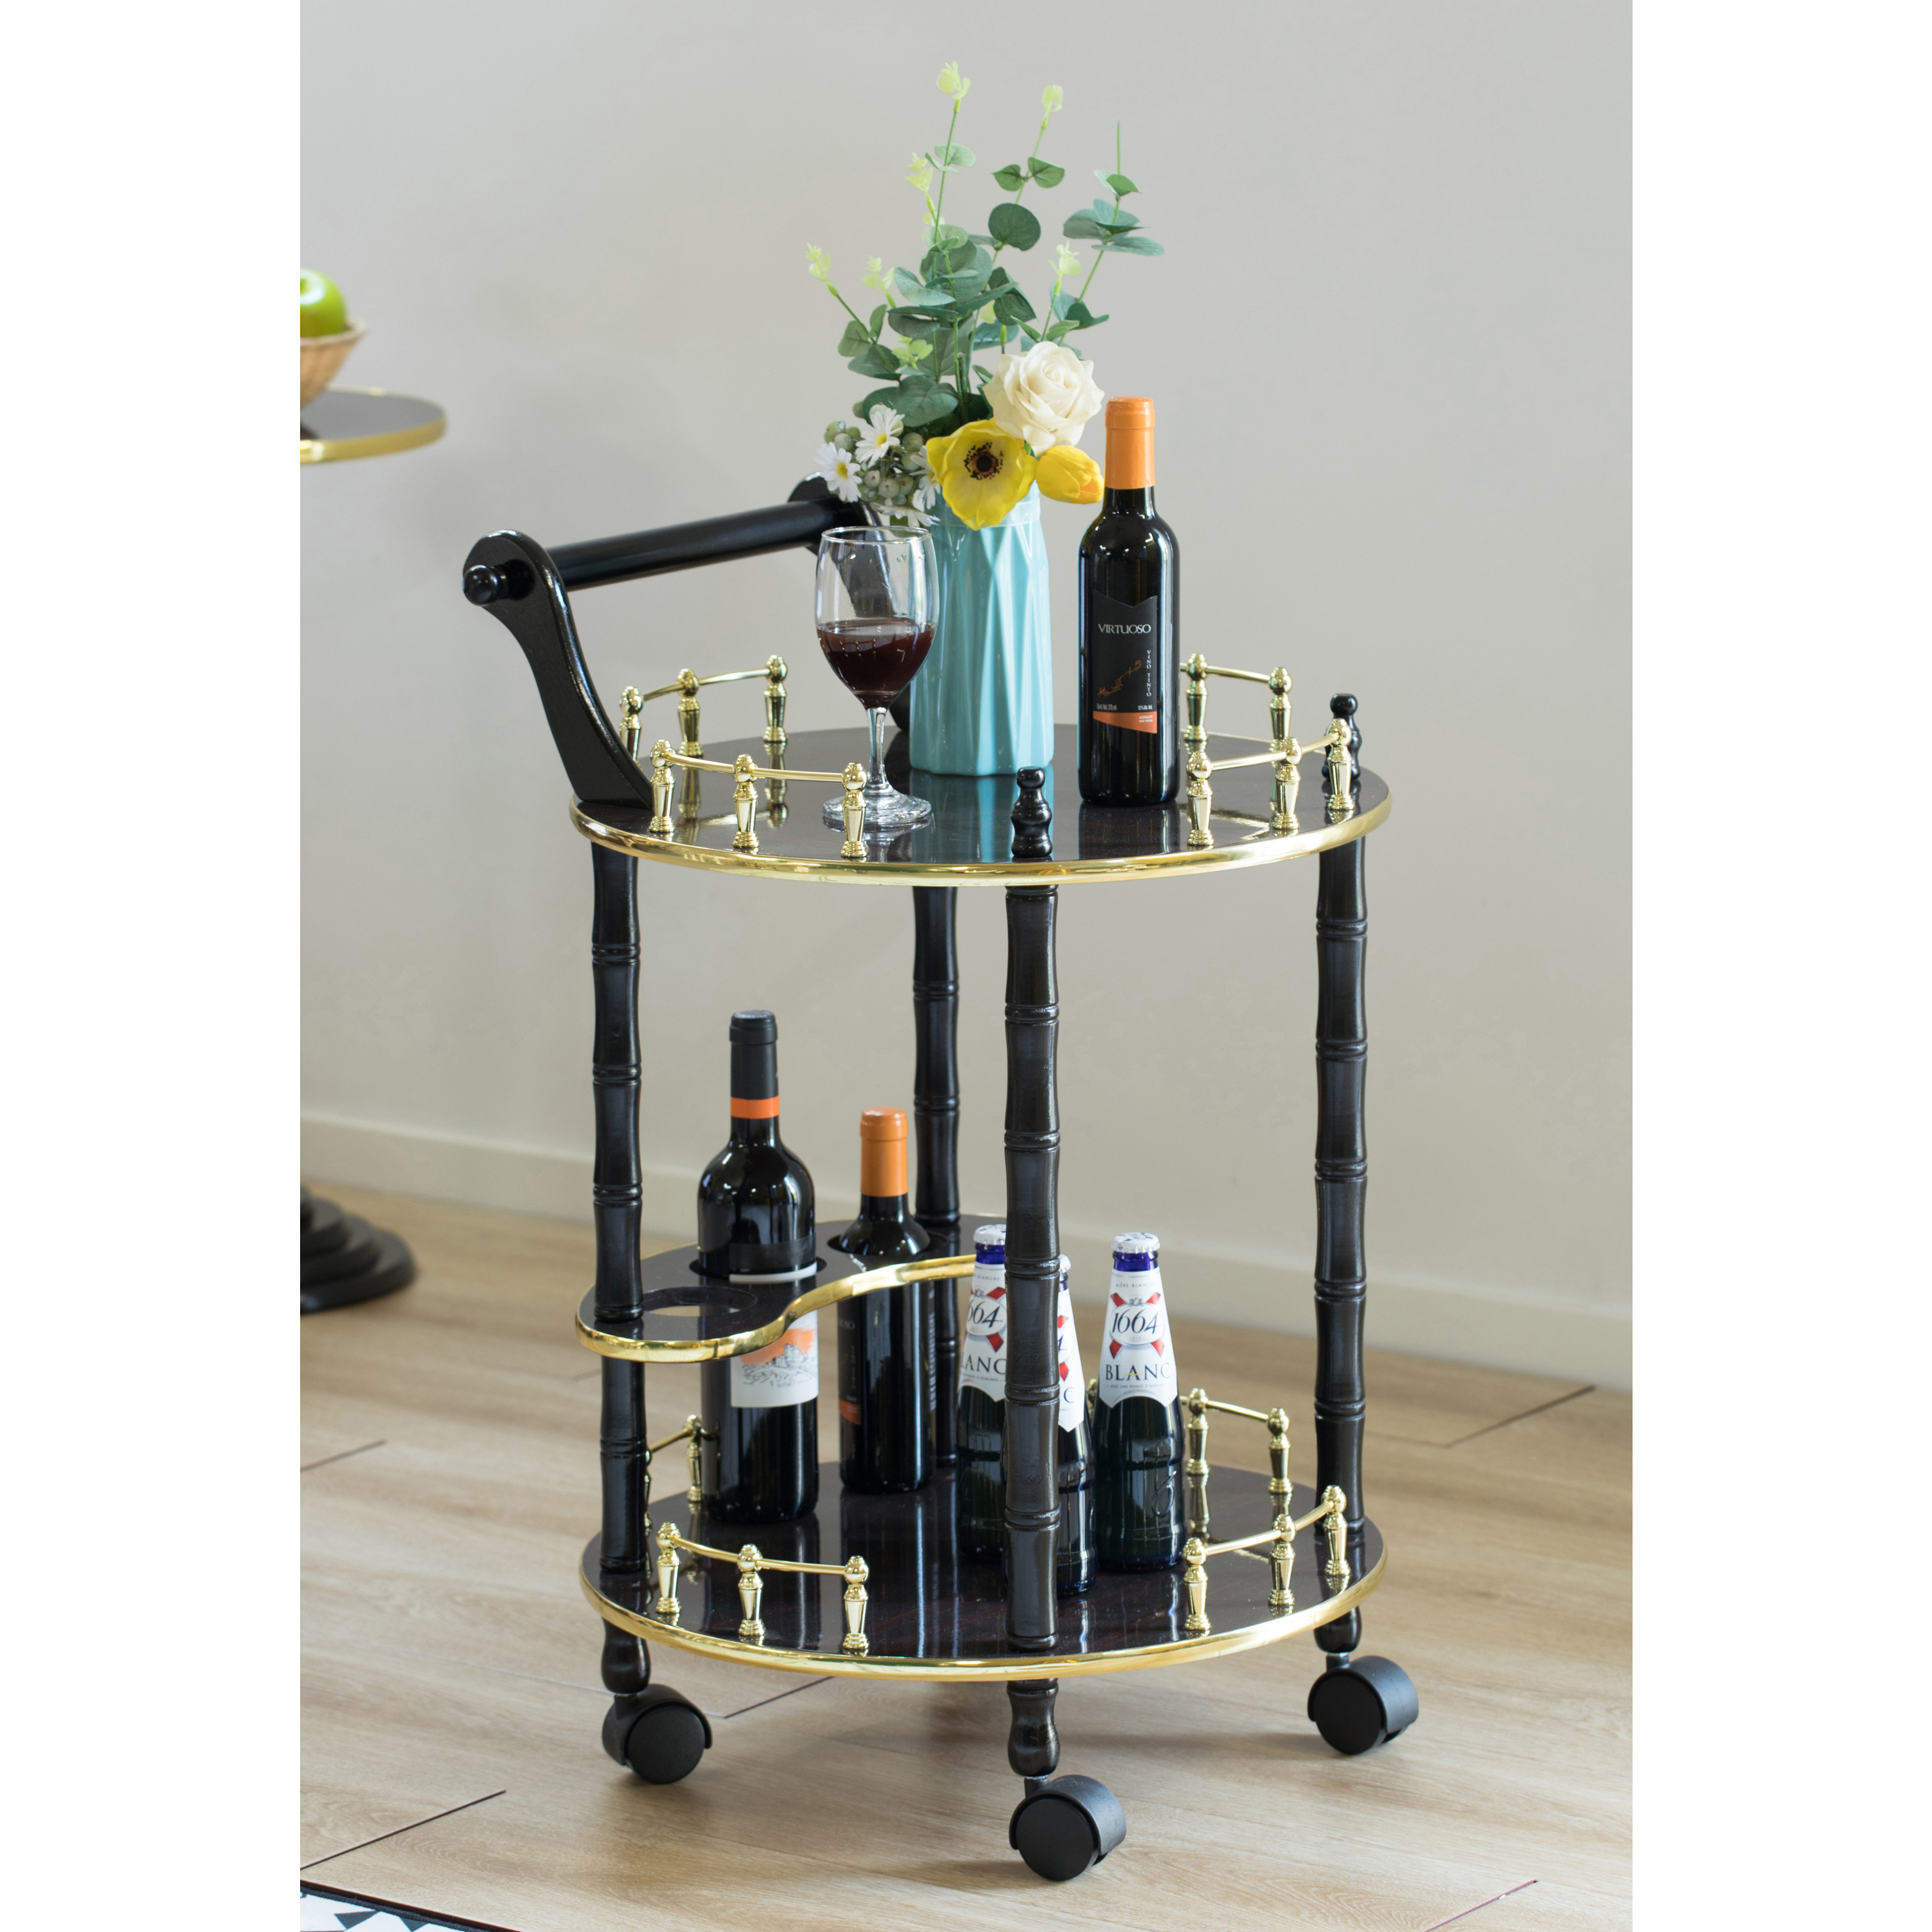 Round Wood Serving Bar Cart Tea Trolley With 2 Tier Shelves And Rolling Wheels - Gray